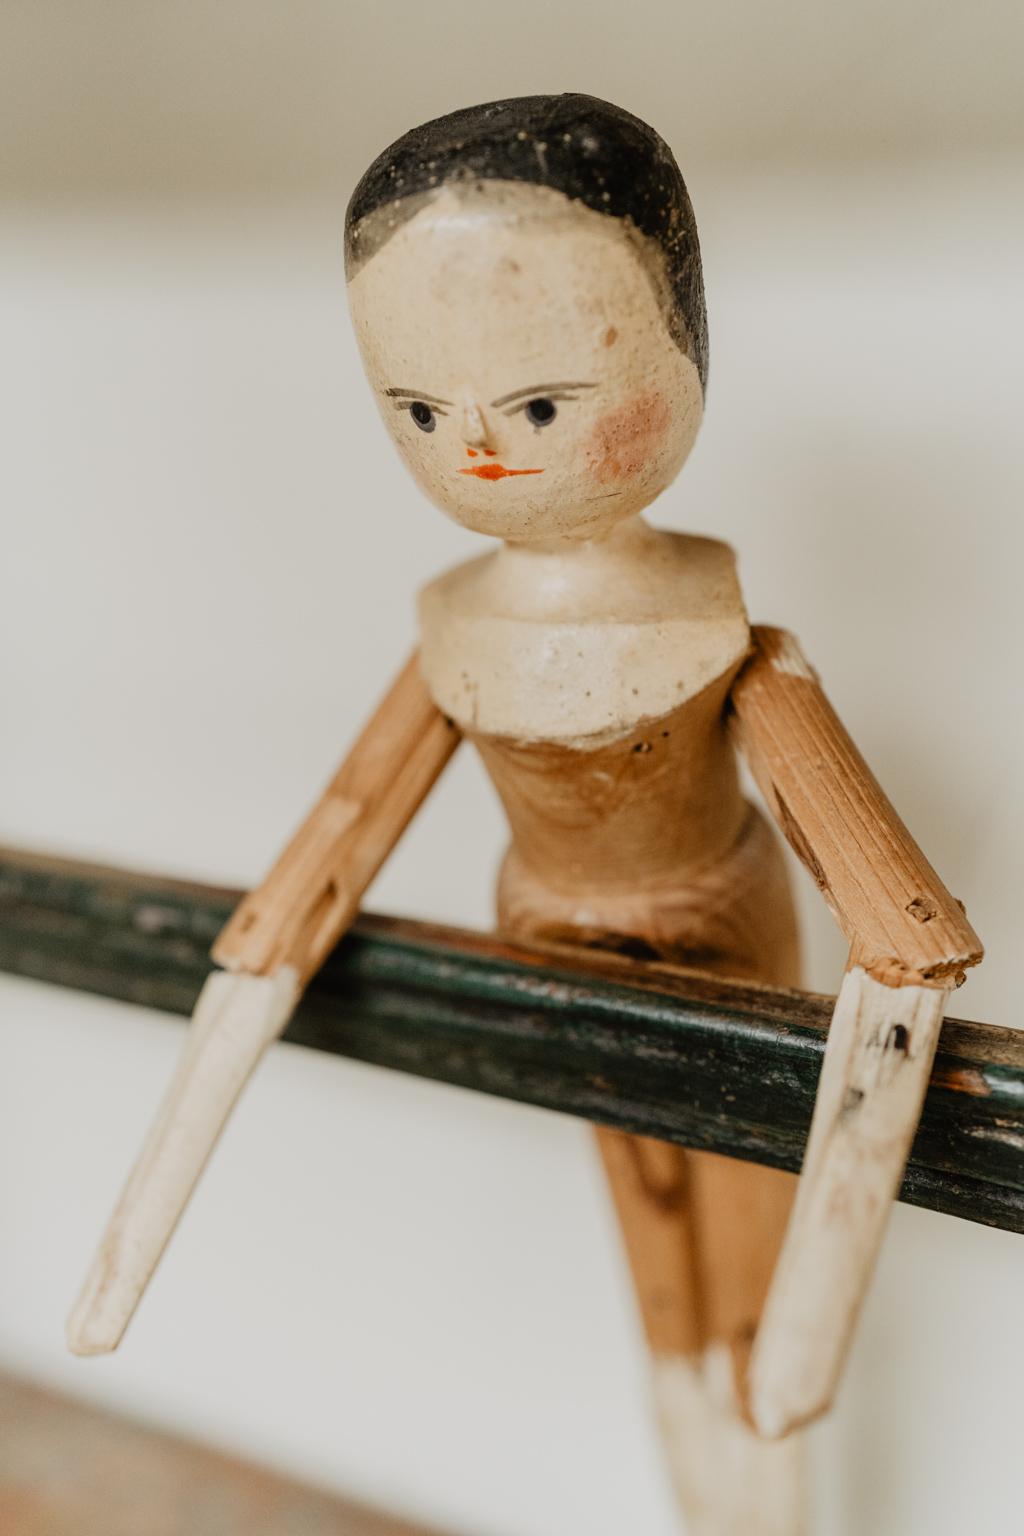 Collection of Wooden Peg Dolls 3